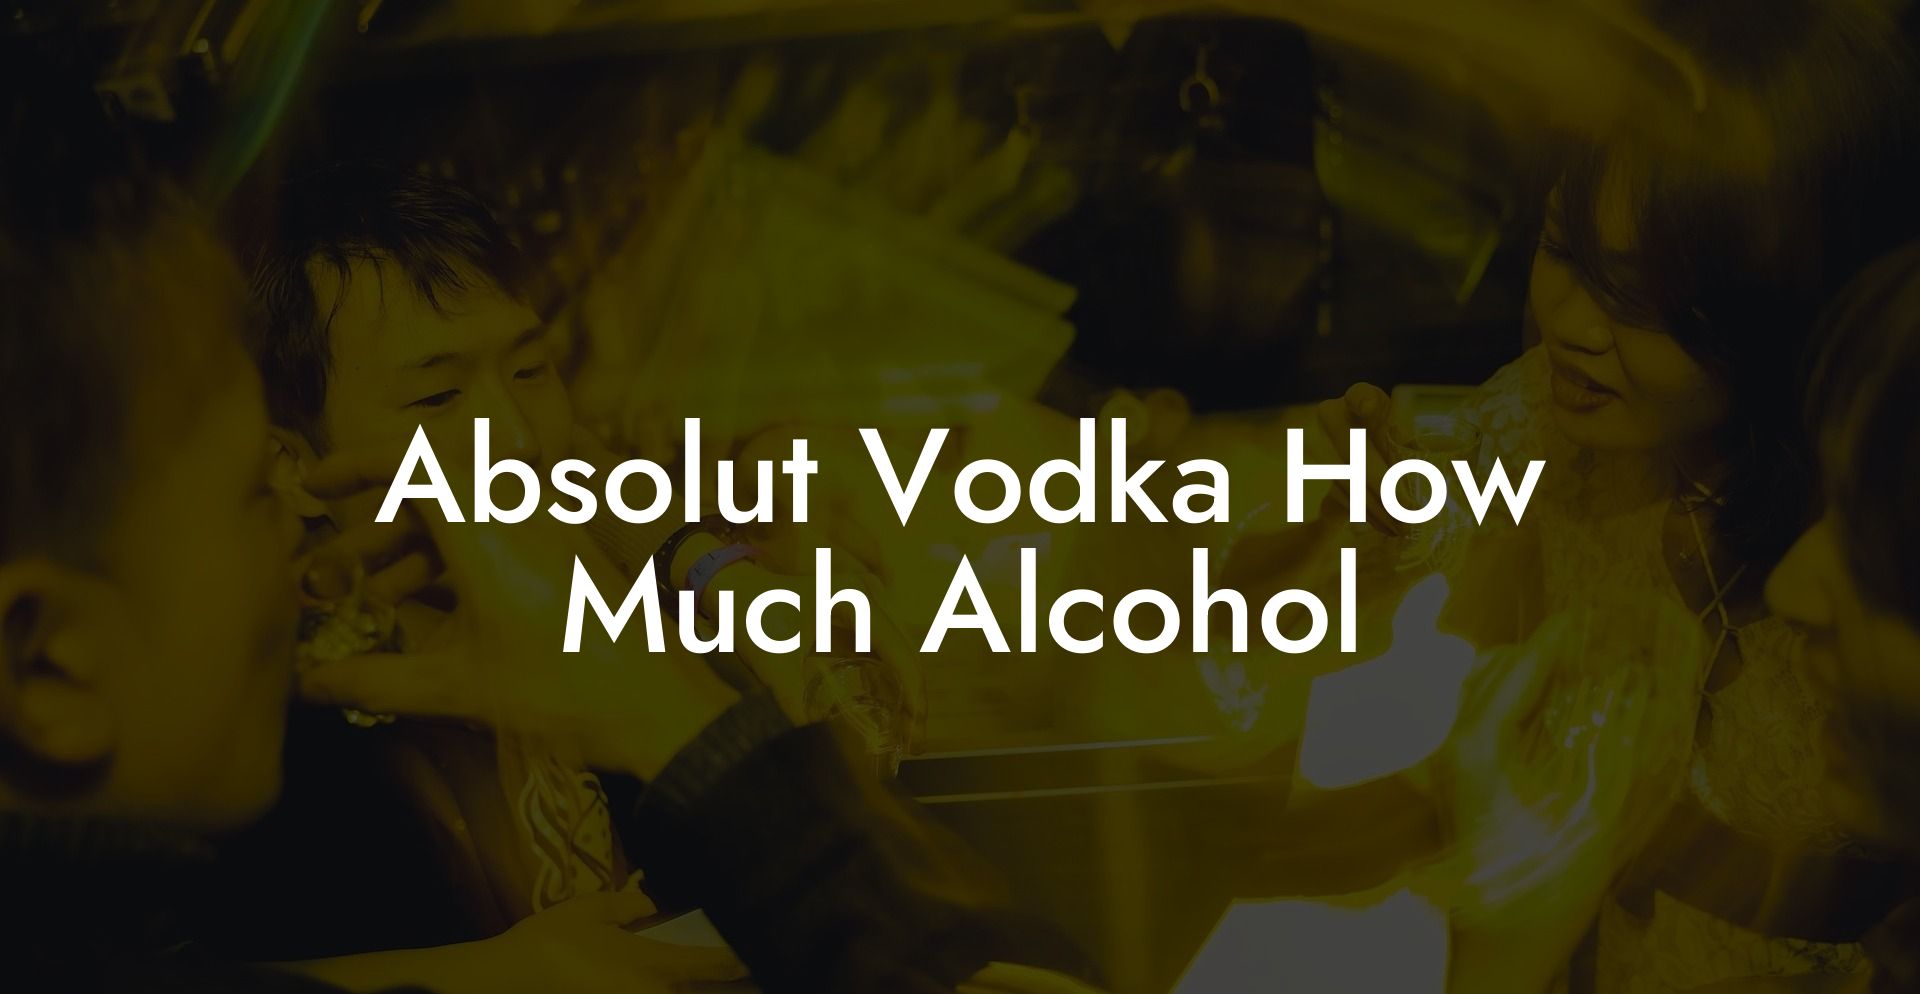 Absolut Vodka How Much Alcohol